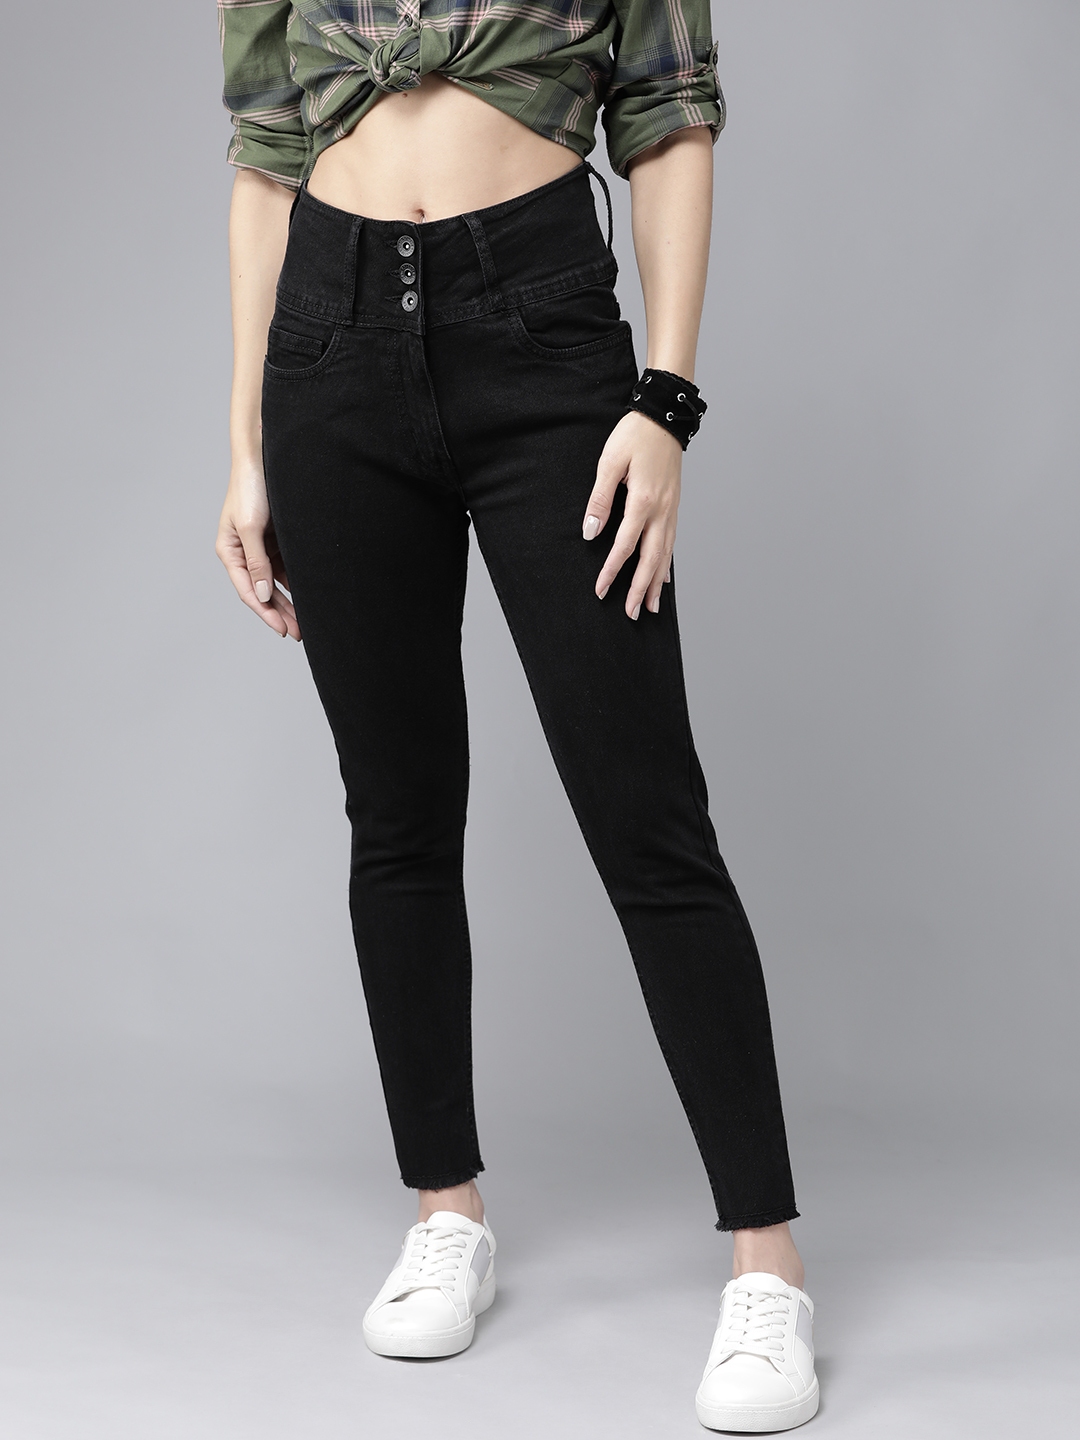 Buy Roadster Women Black Regular Fit High Rise Clean Look Stretchable Jeans - Jeans for Women 